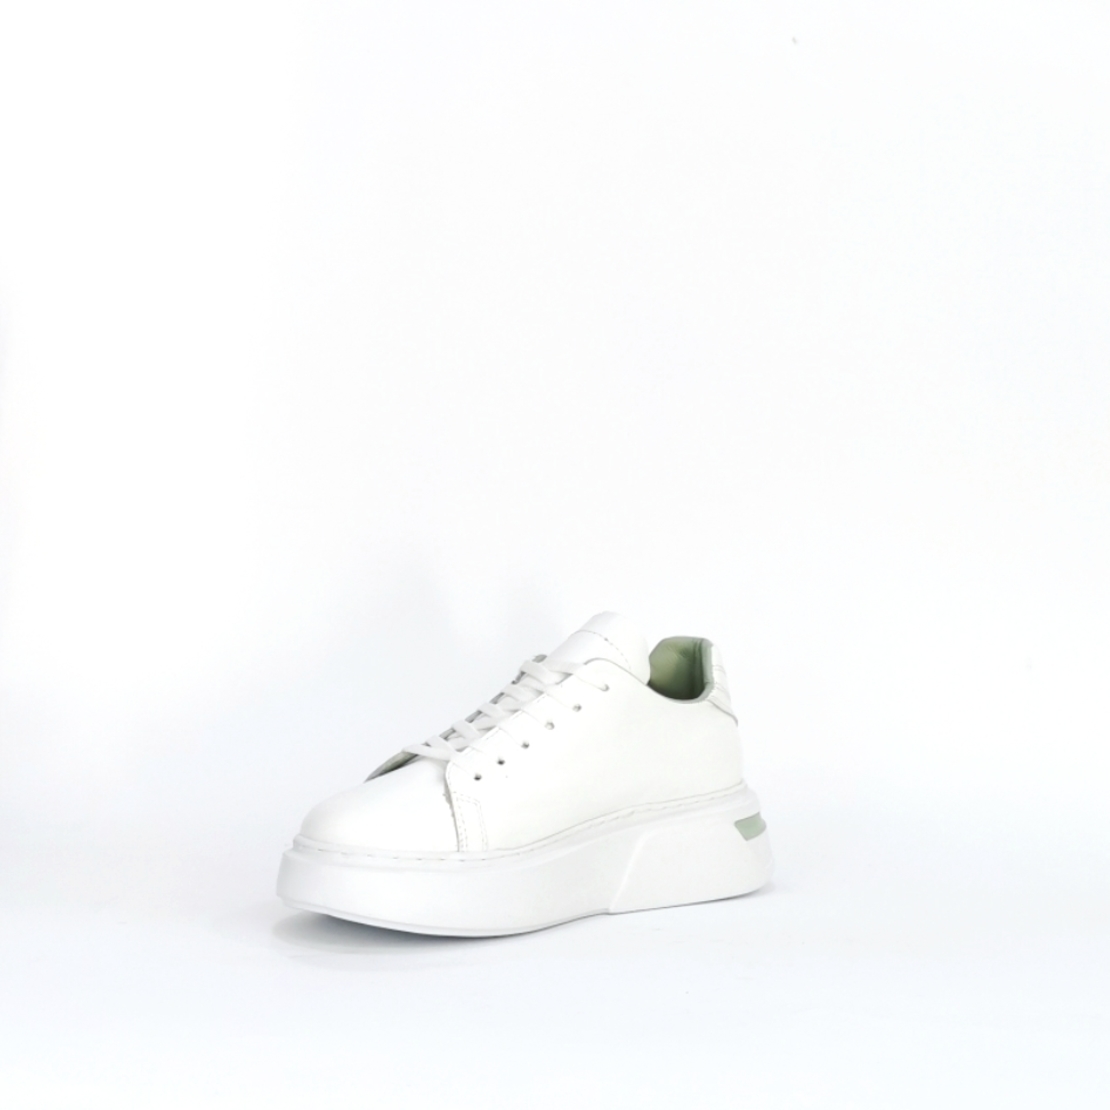 Women's sneaker made of natural leather in white color with anatomical insole/7012